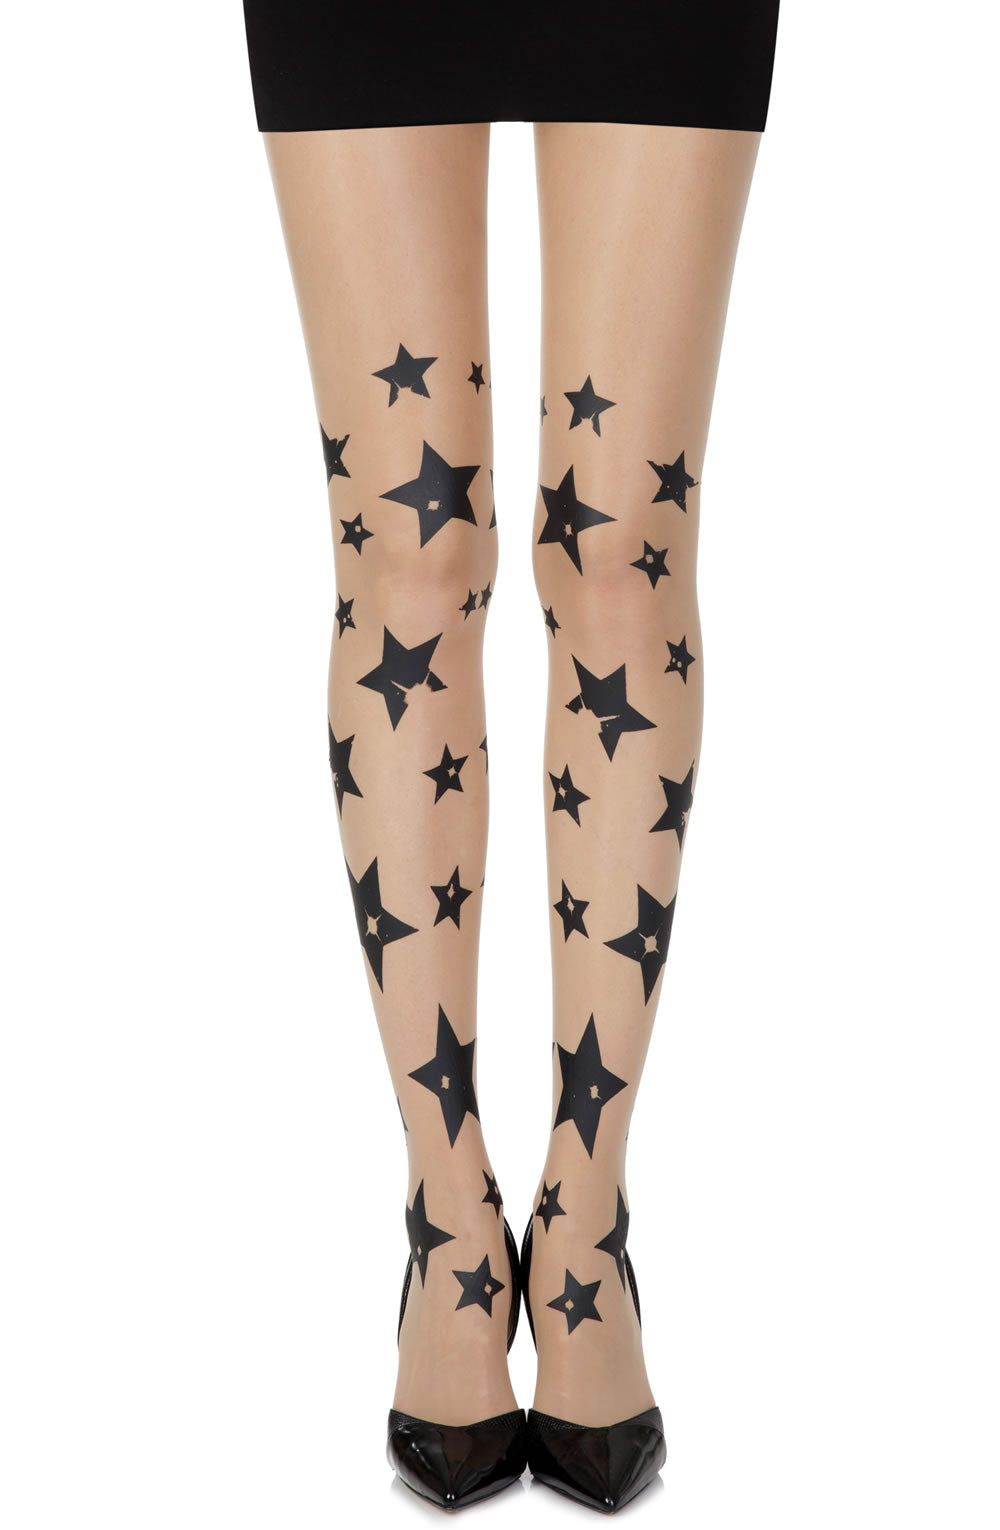 Zohara “Shooting Stars” Skin Sheer Print Tights  Hosiery, NEWLY-IMPORTED, Tights, Zohara - So Luxe Lingerie